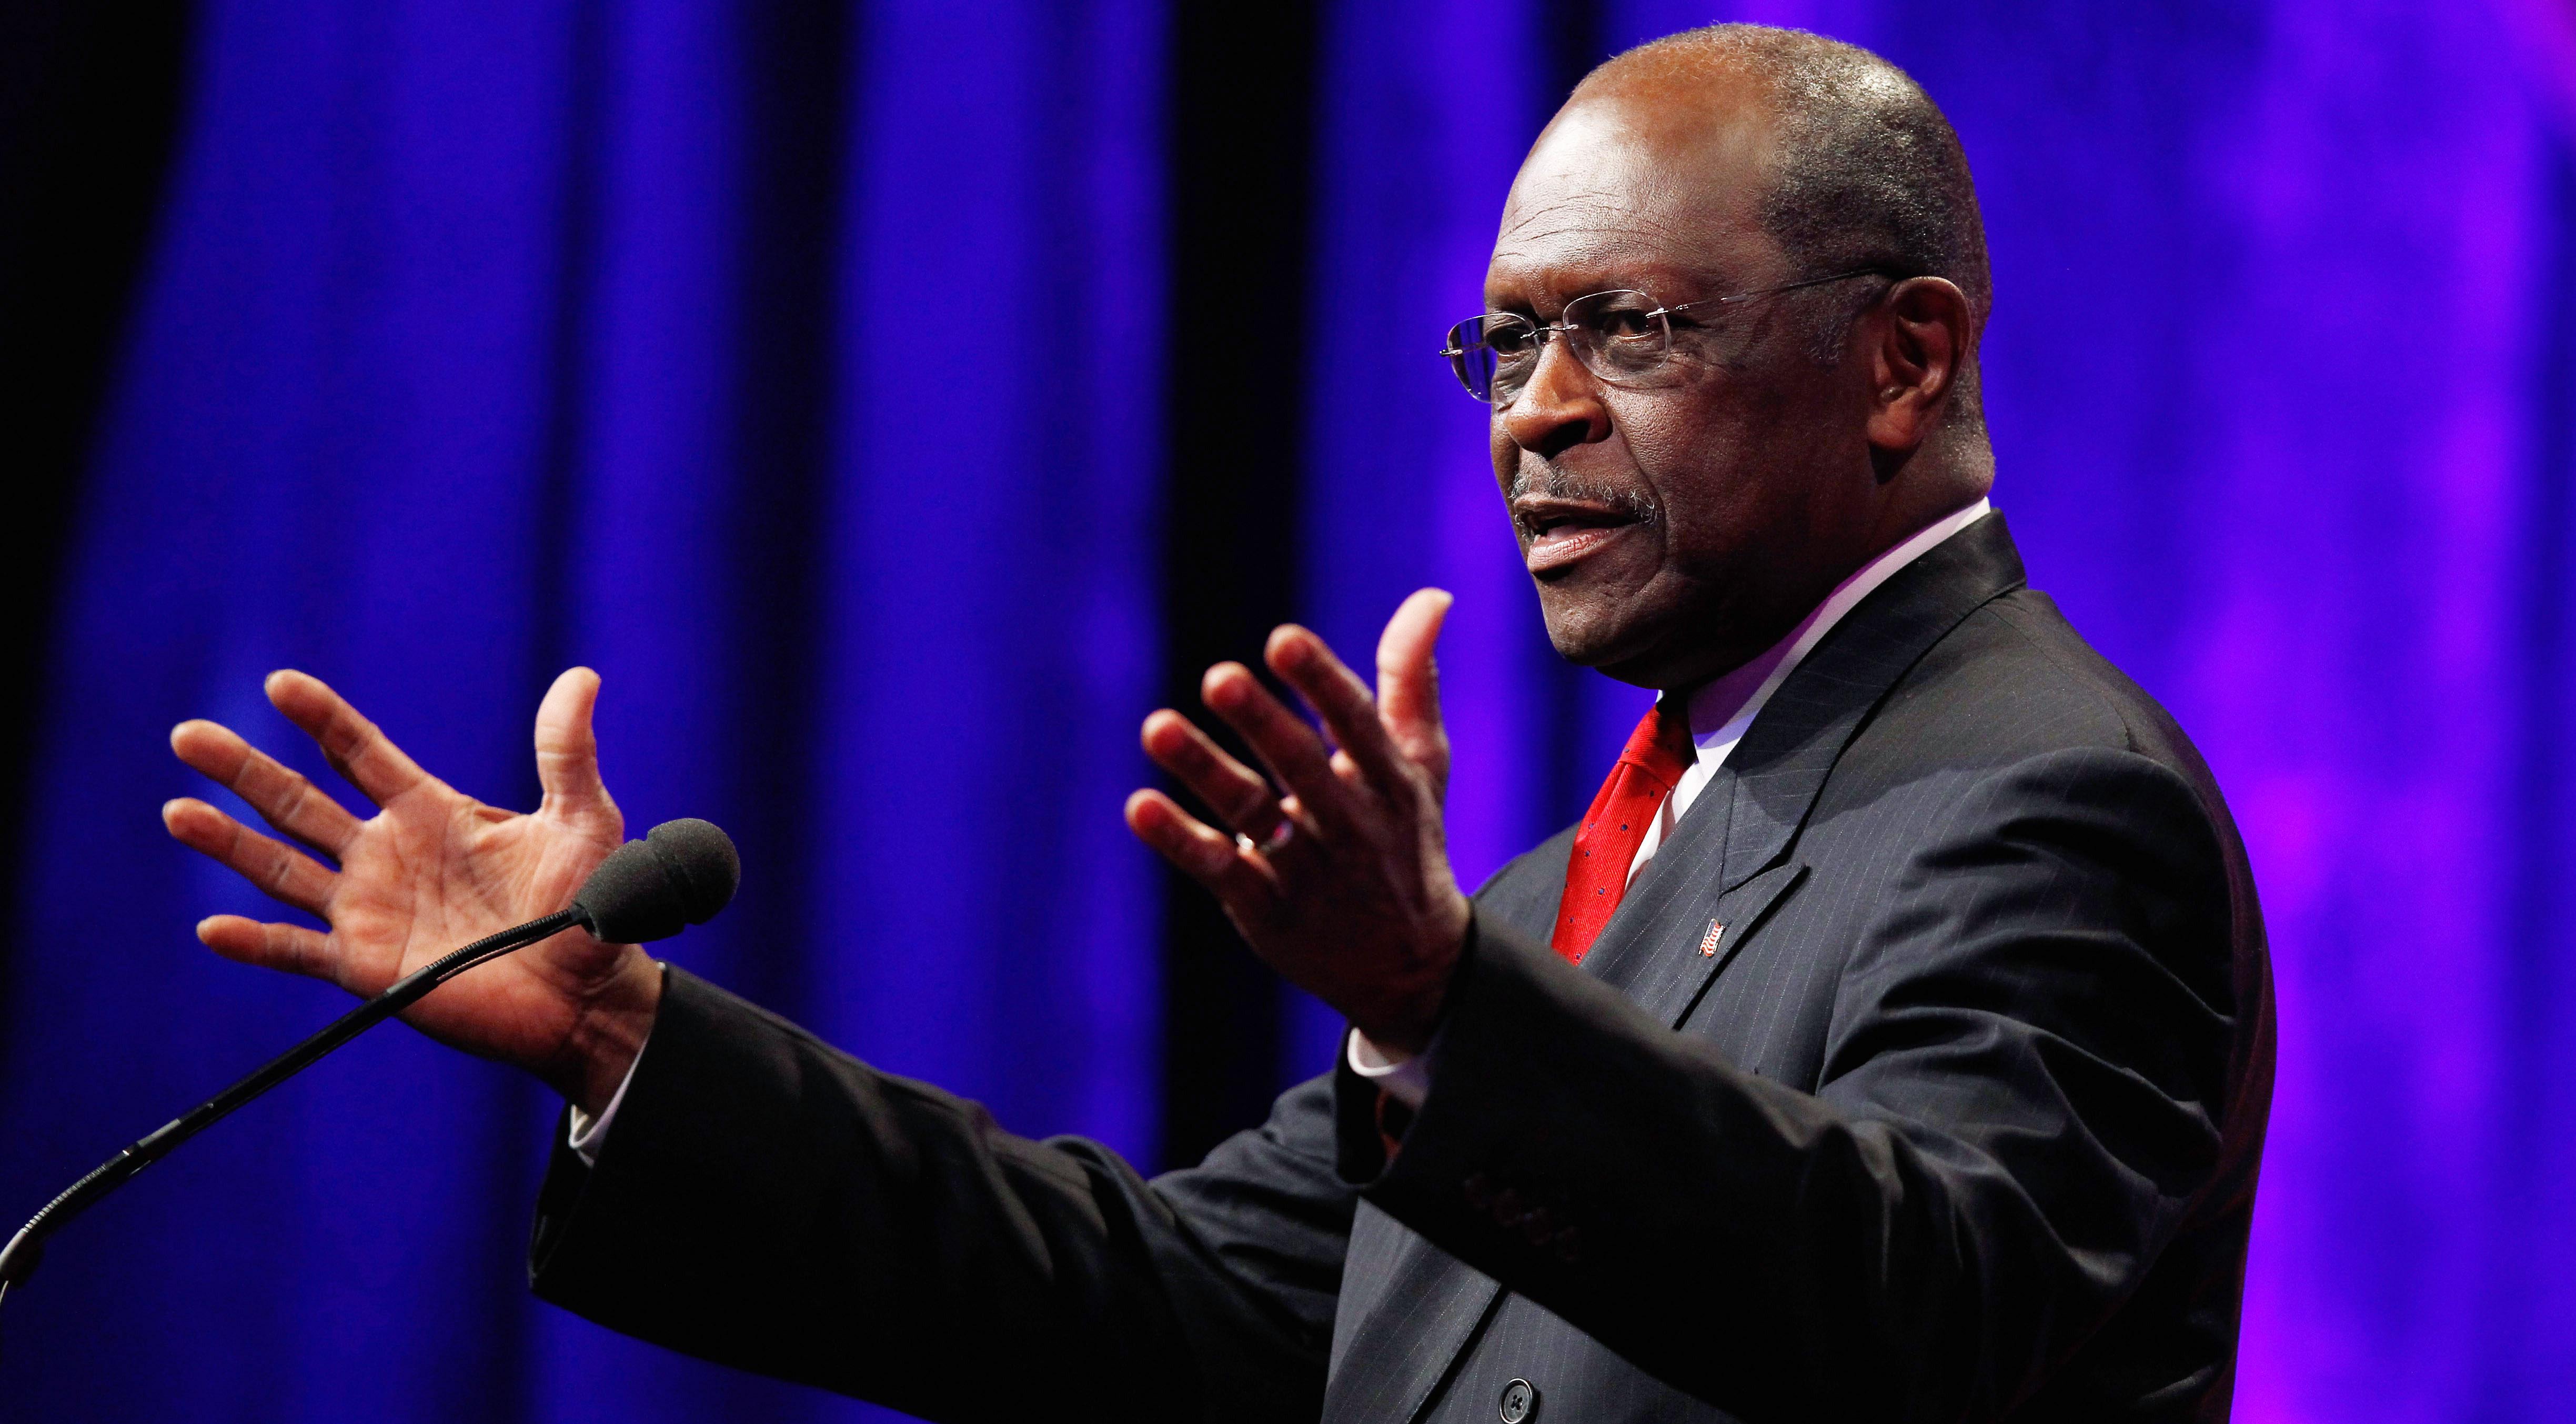 Republican presidential candidate and former Godfather's Pizza CEO Herman Cain.